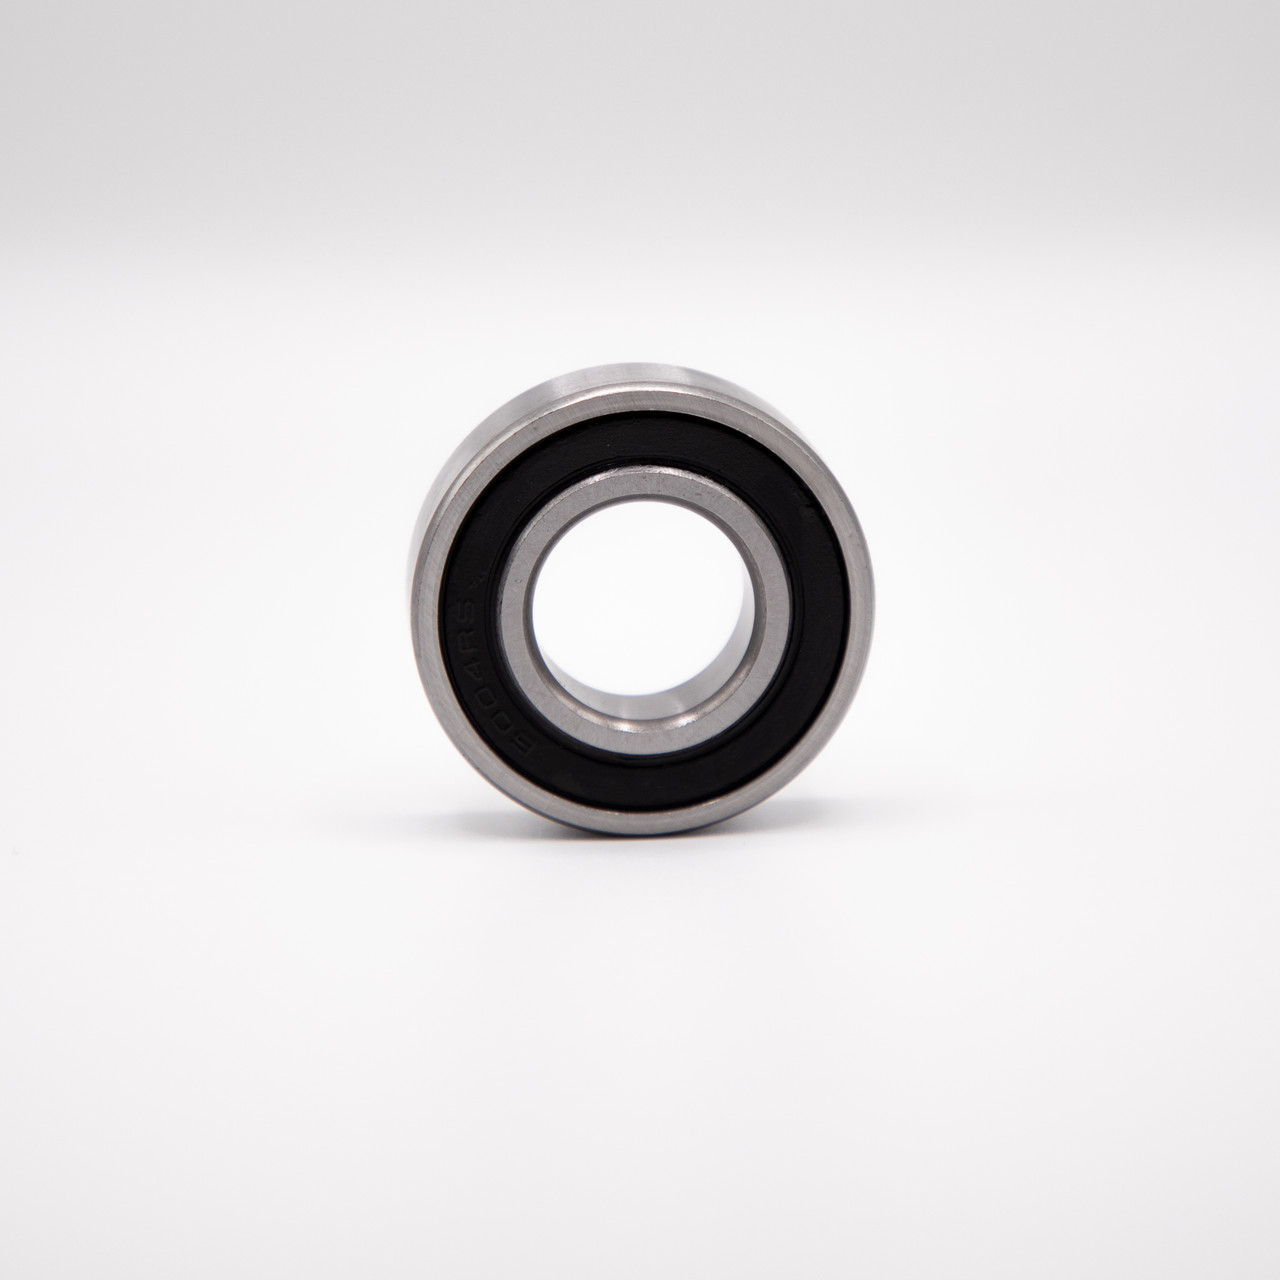 634-2RS Miniature Ball Bearing 4x16x5 Front View